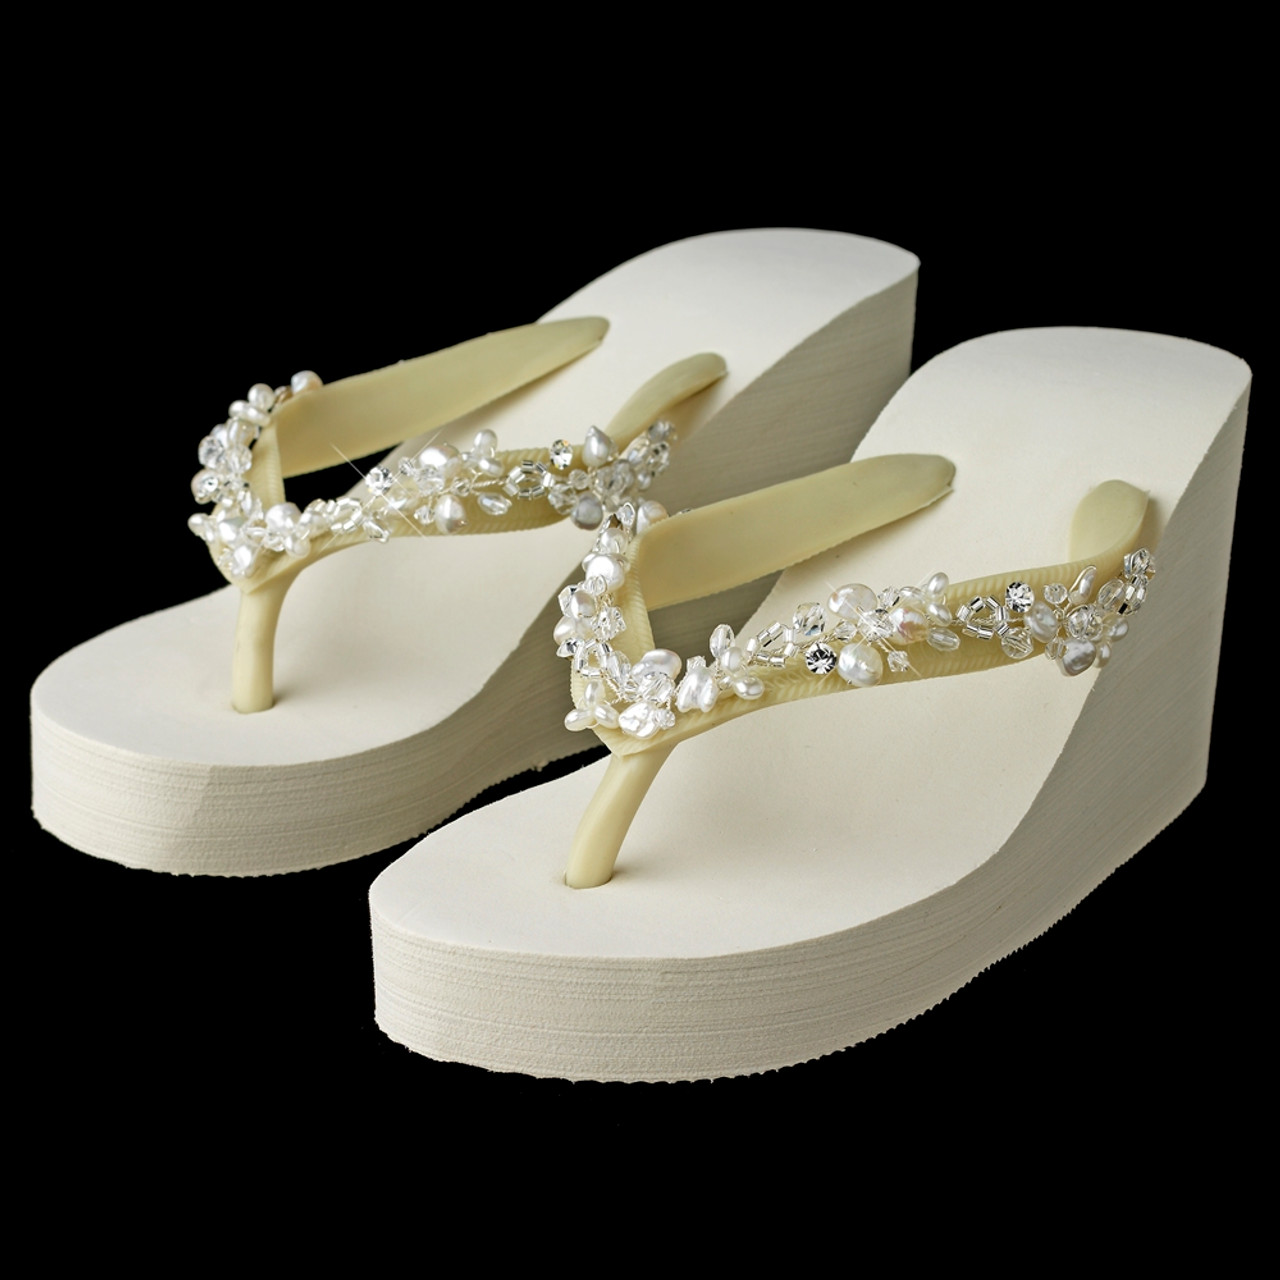 Crystal & Freshwater Pearl Accents High Wedge Flip Flops